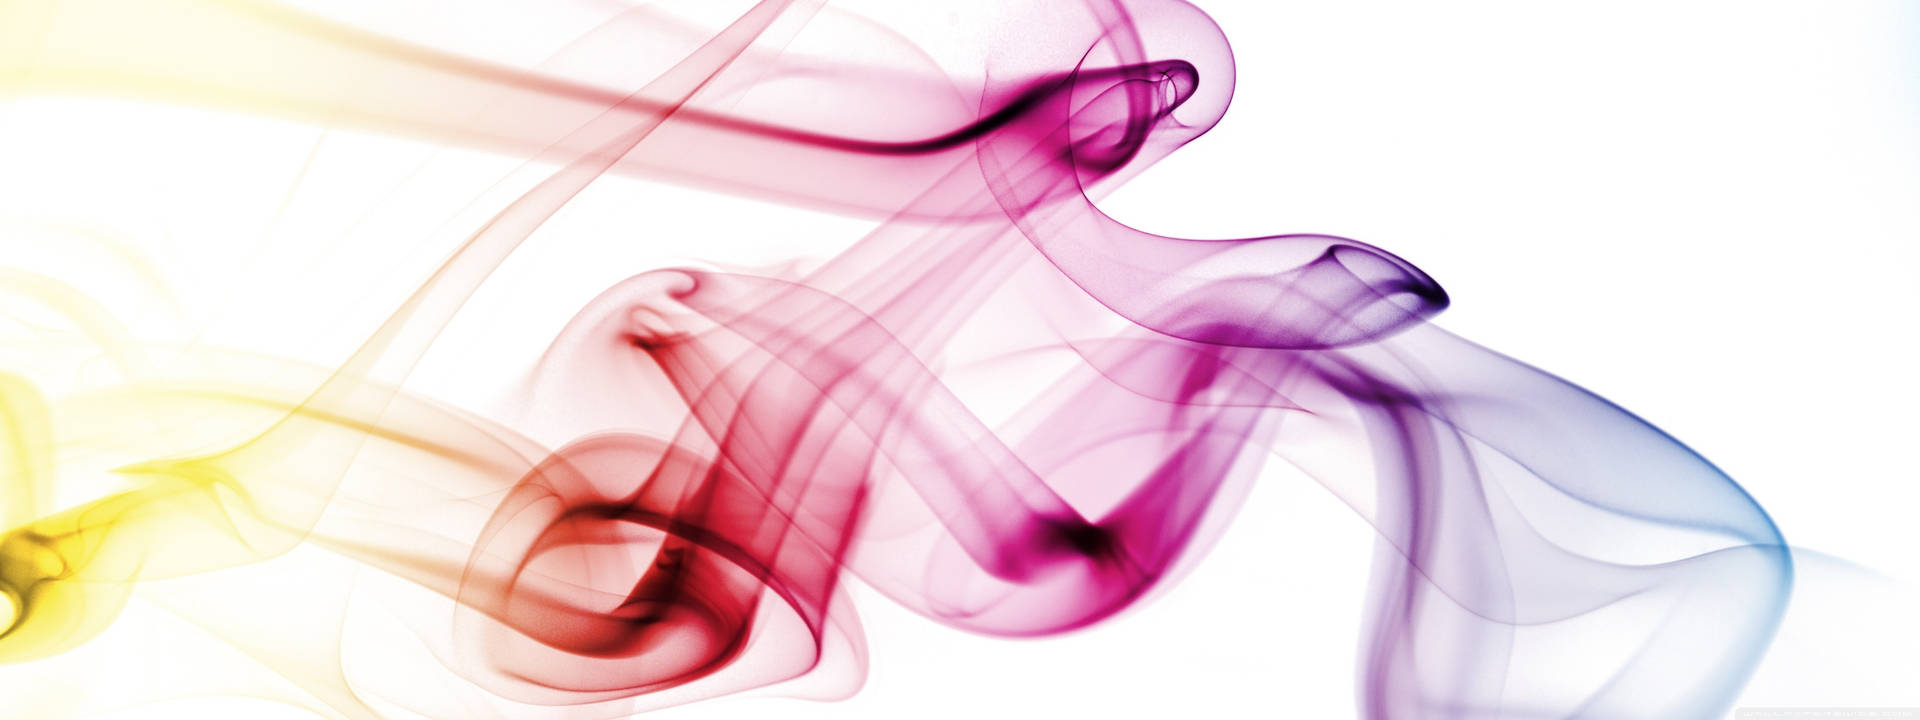 Colored Smoke On A White Color Background Wallpaper